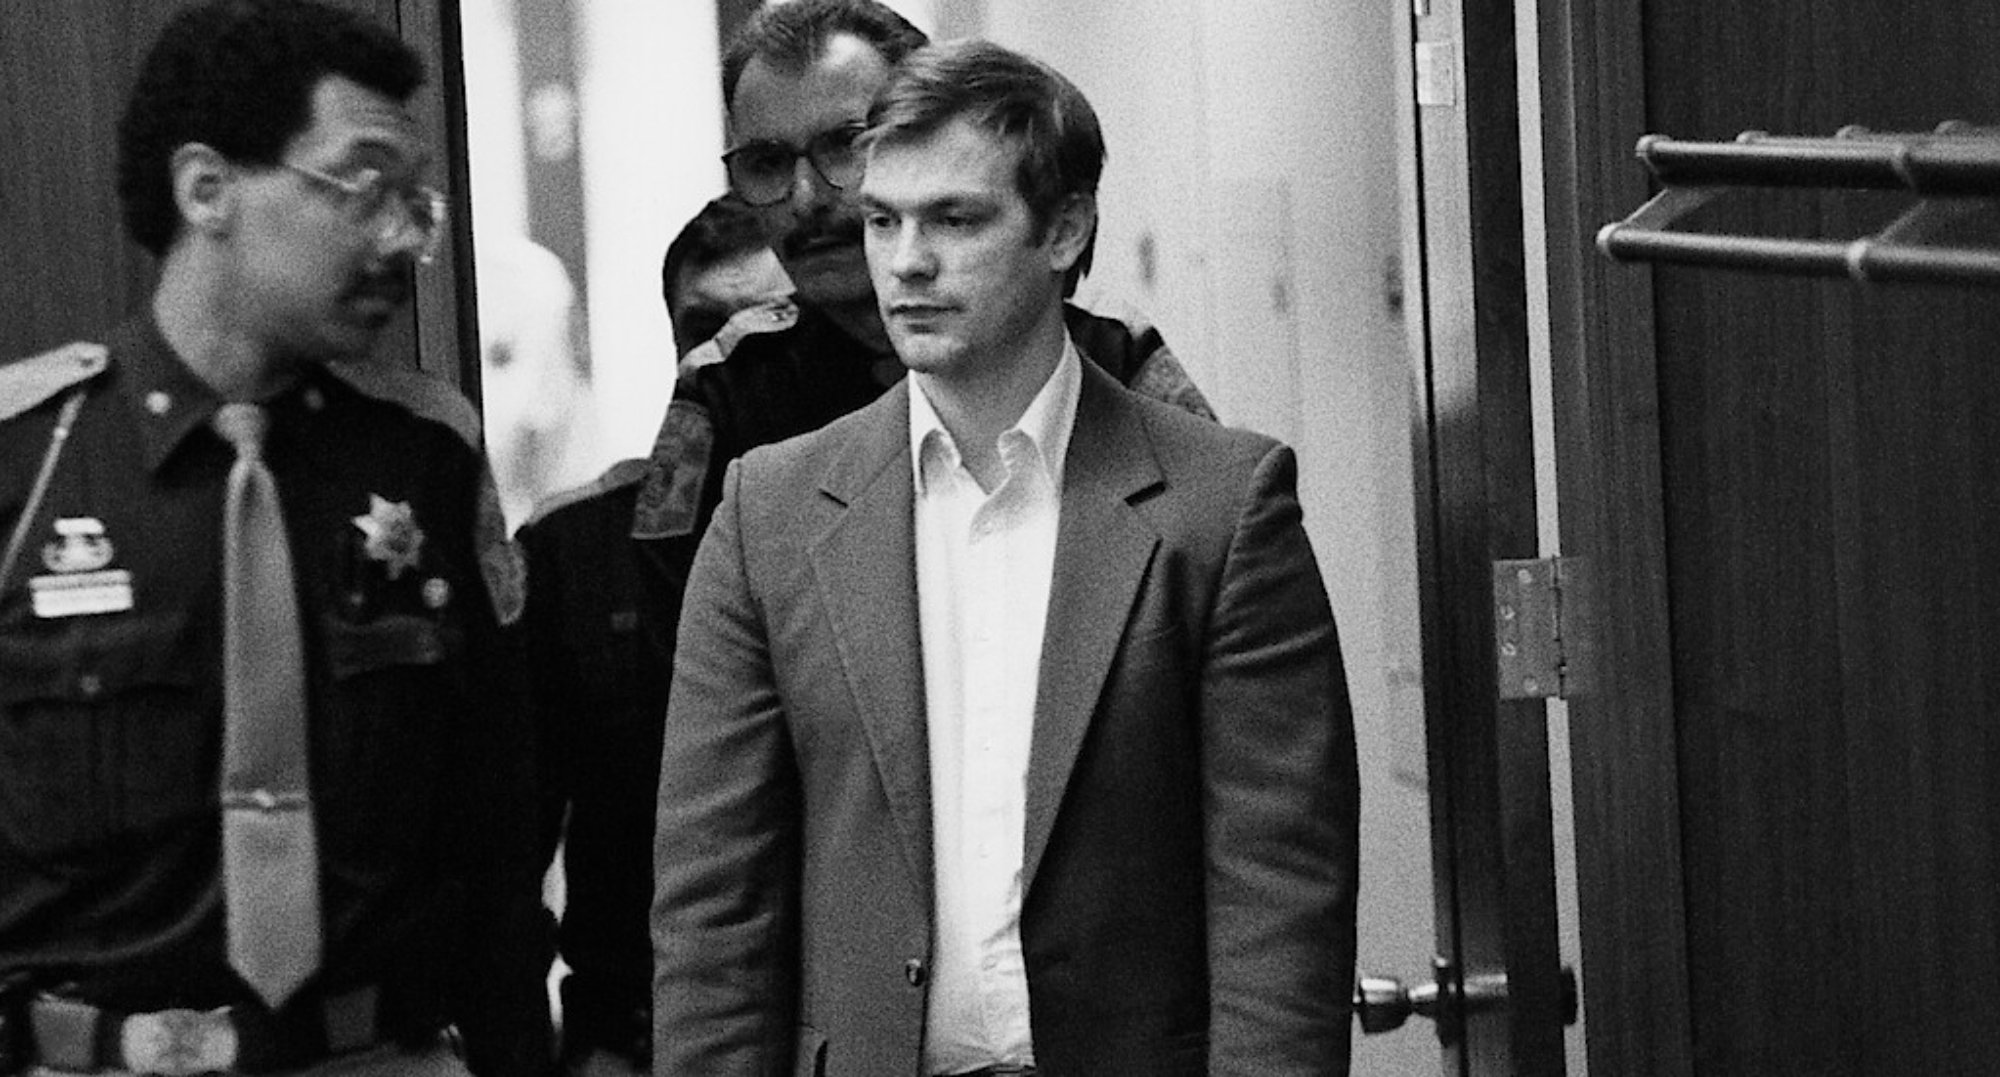 Jeffrey Dahmer in court in 'Conversations With a Killer The Jeffrey Dahmer Tapes' and neighbors.